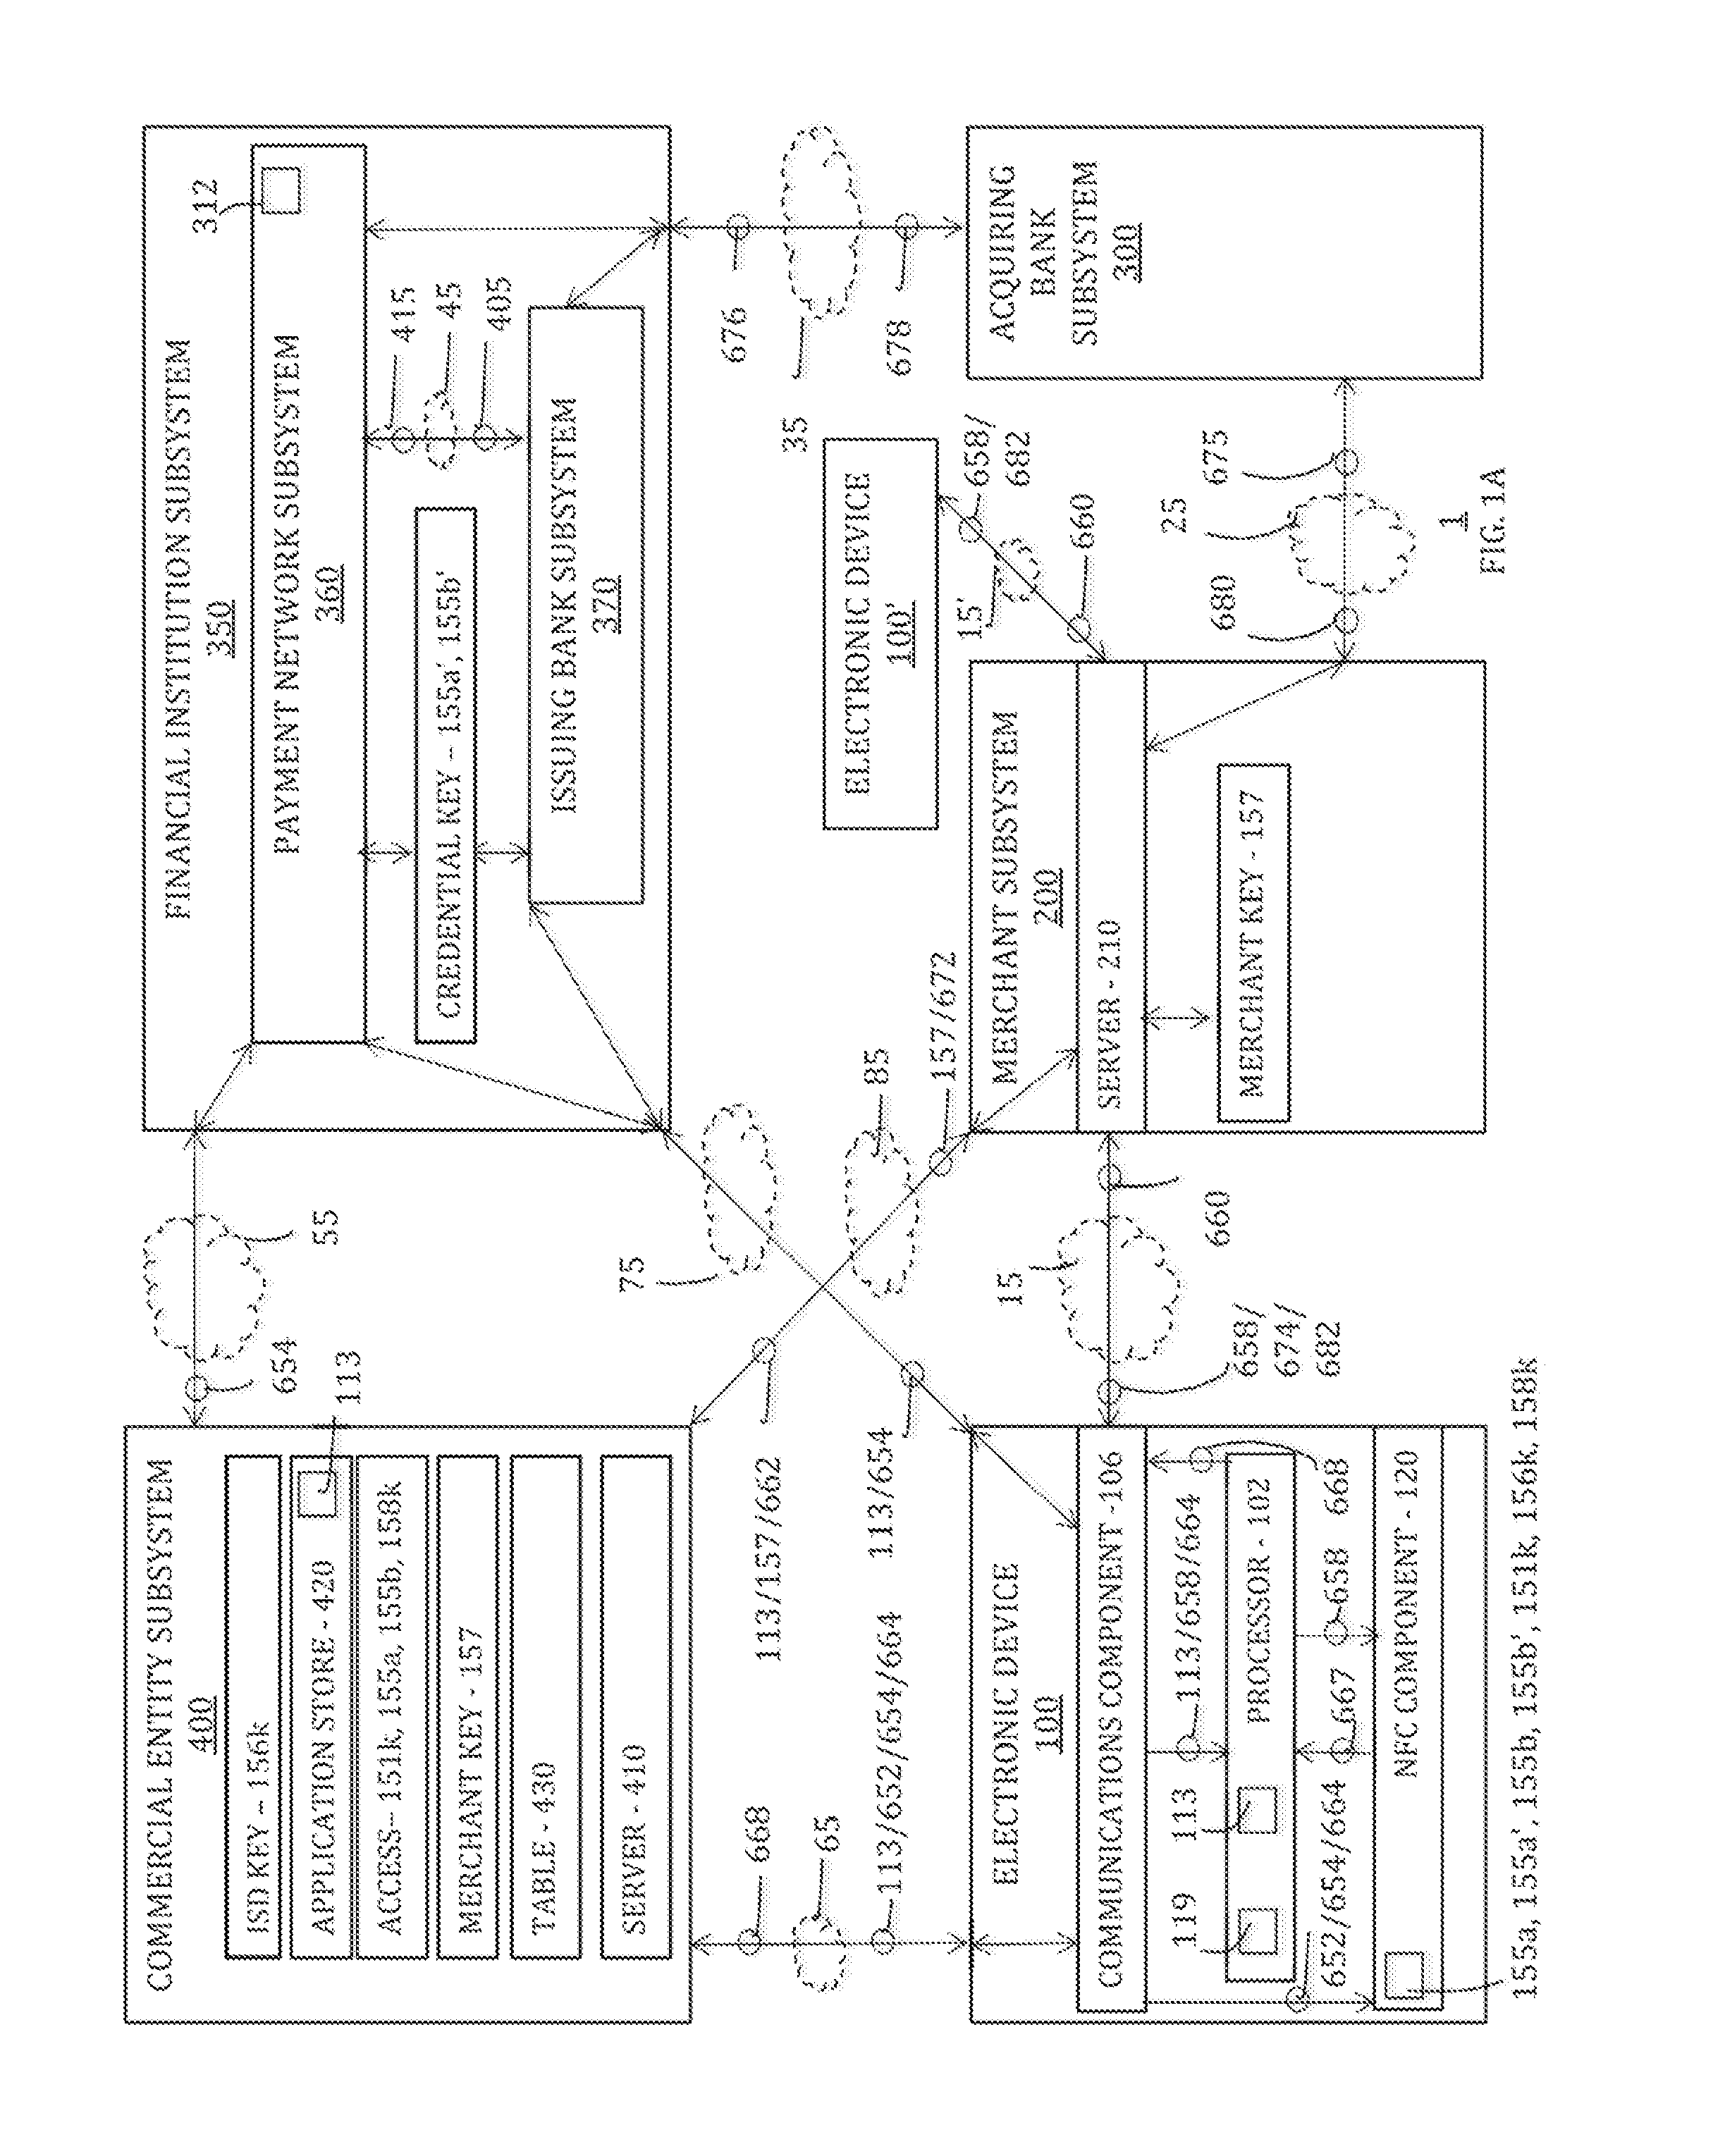 Initiation of online payments using an electronic device identifier